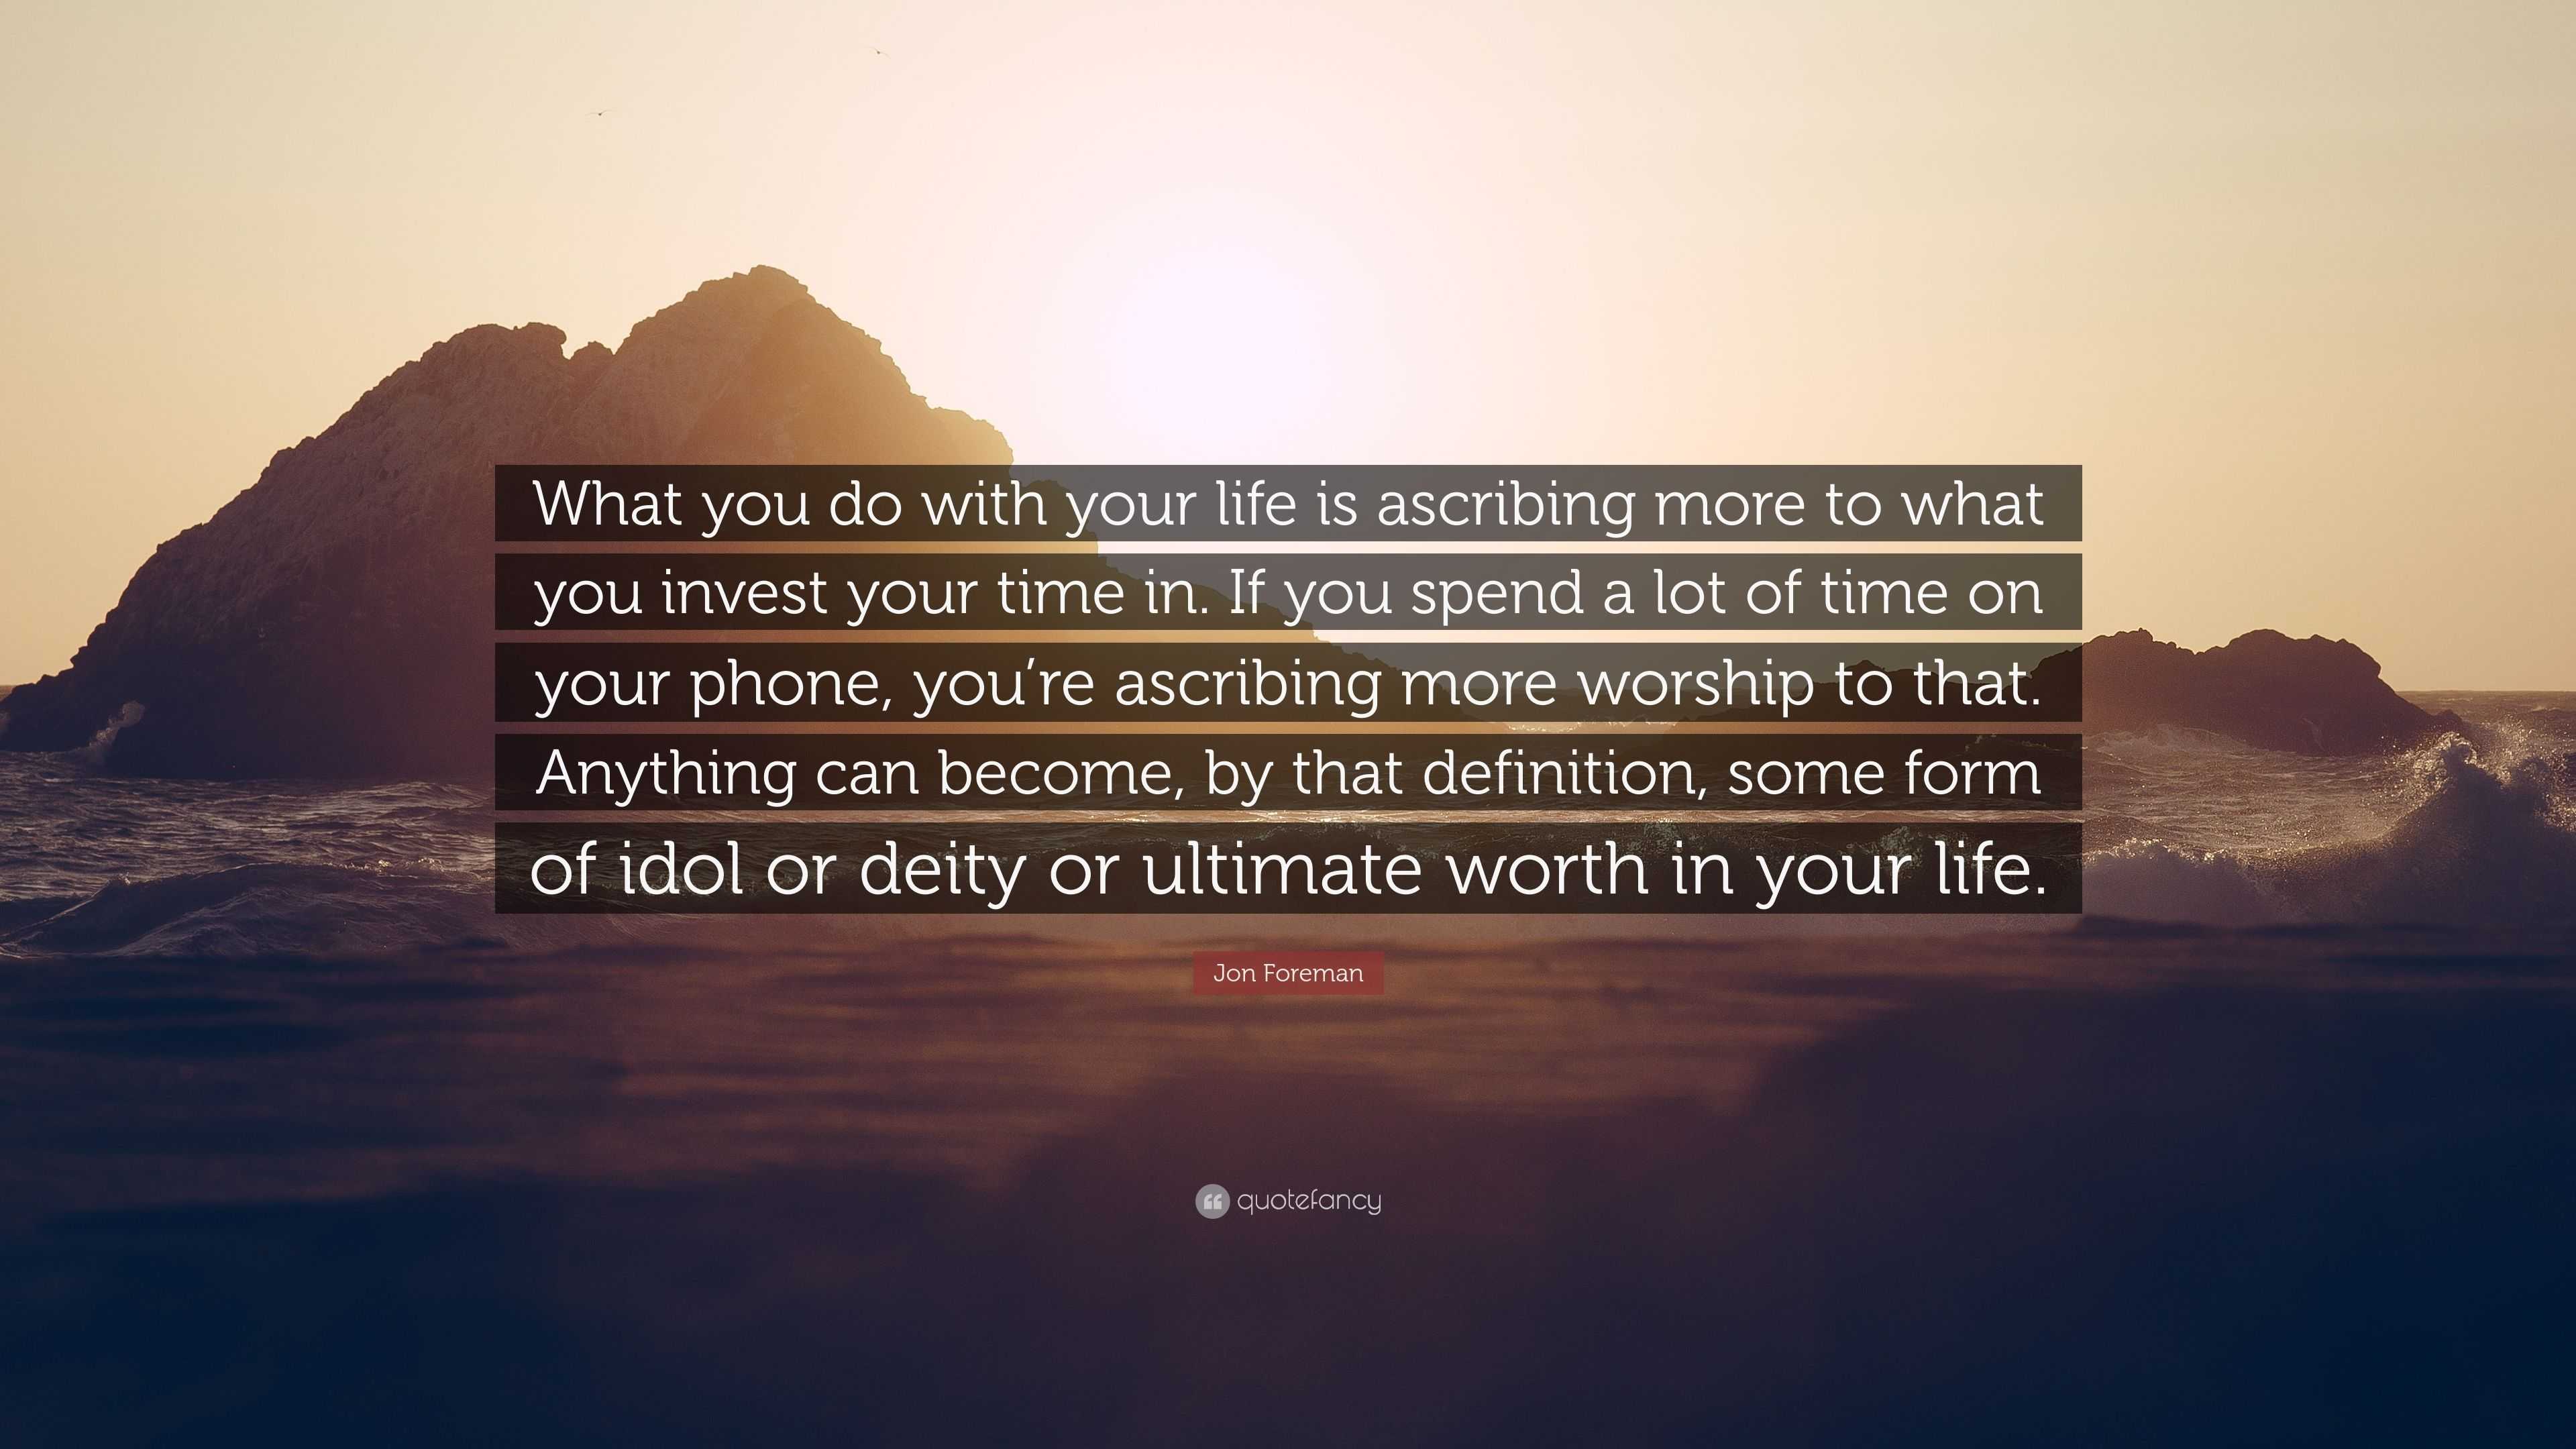 Jon Foreman Quote: “What you do with your life is ascribing more to ...